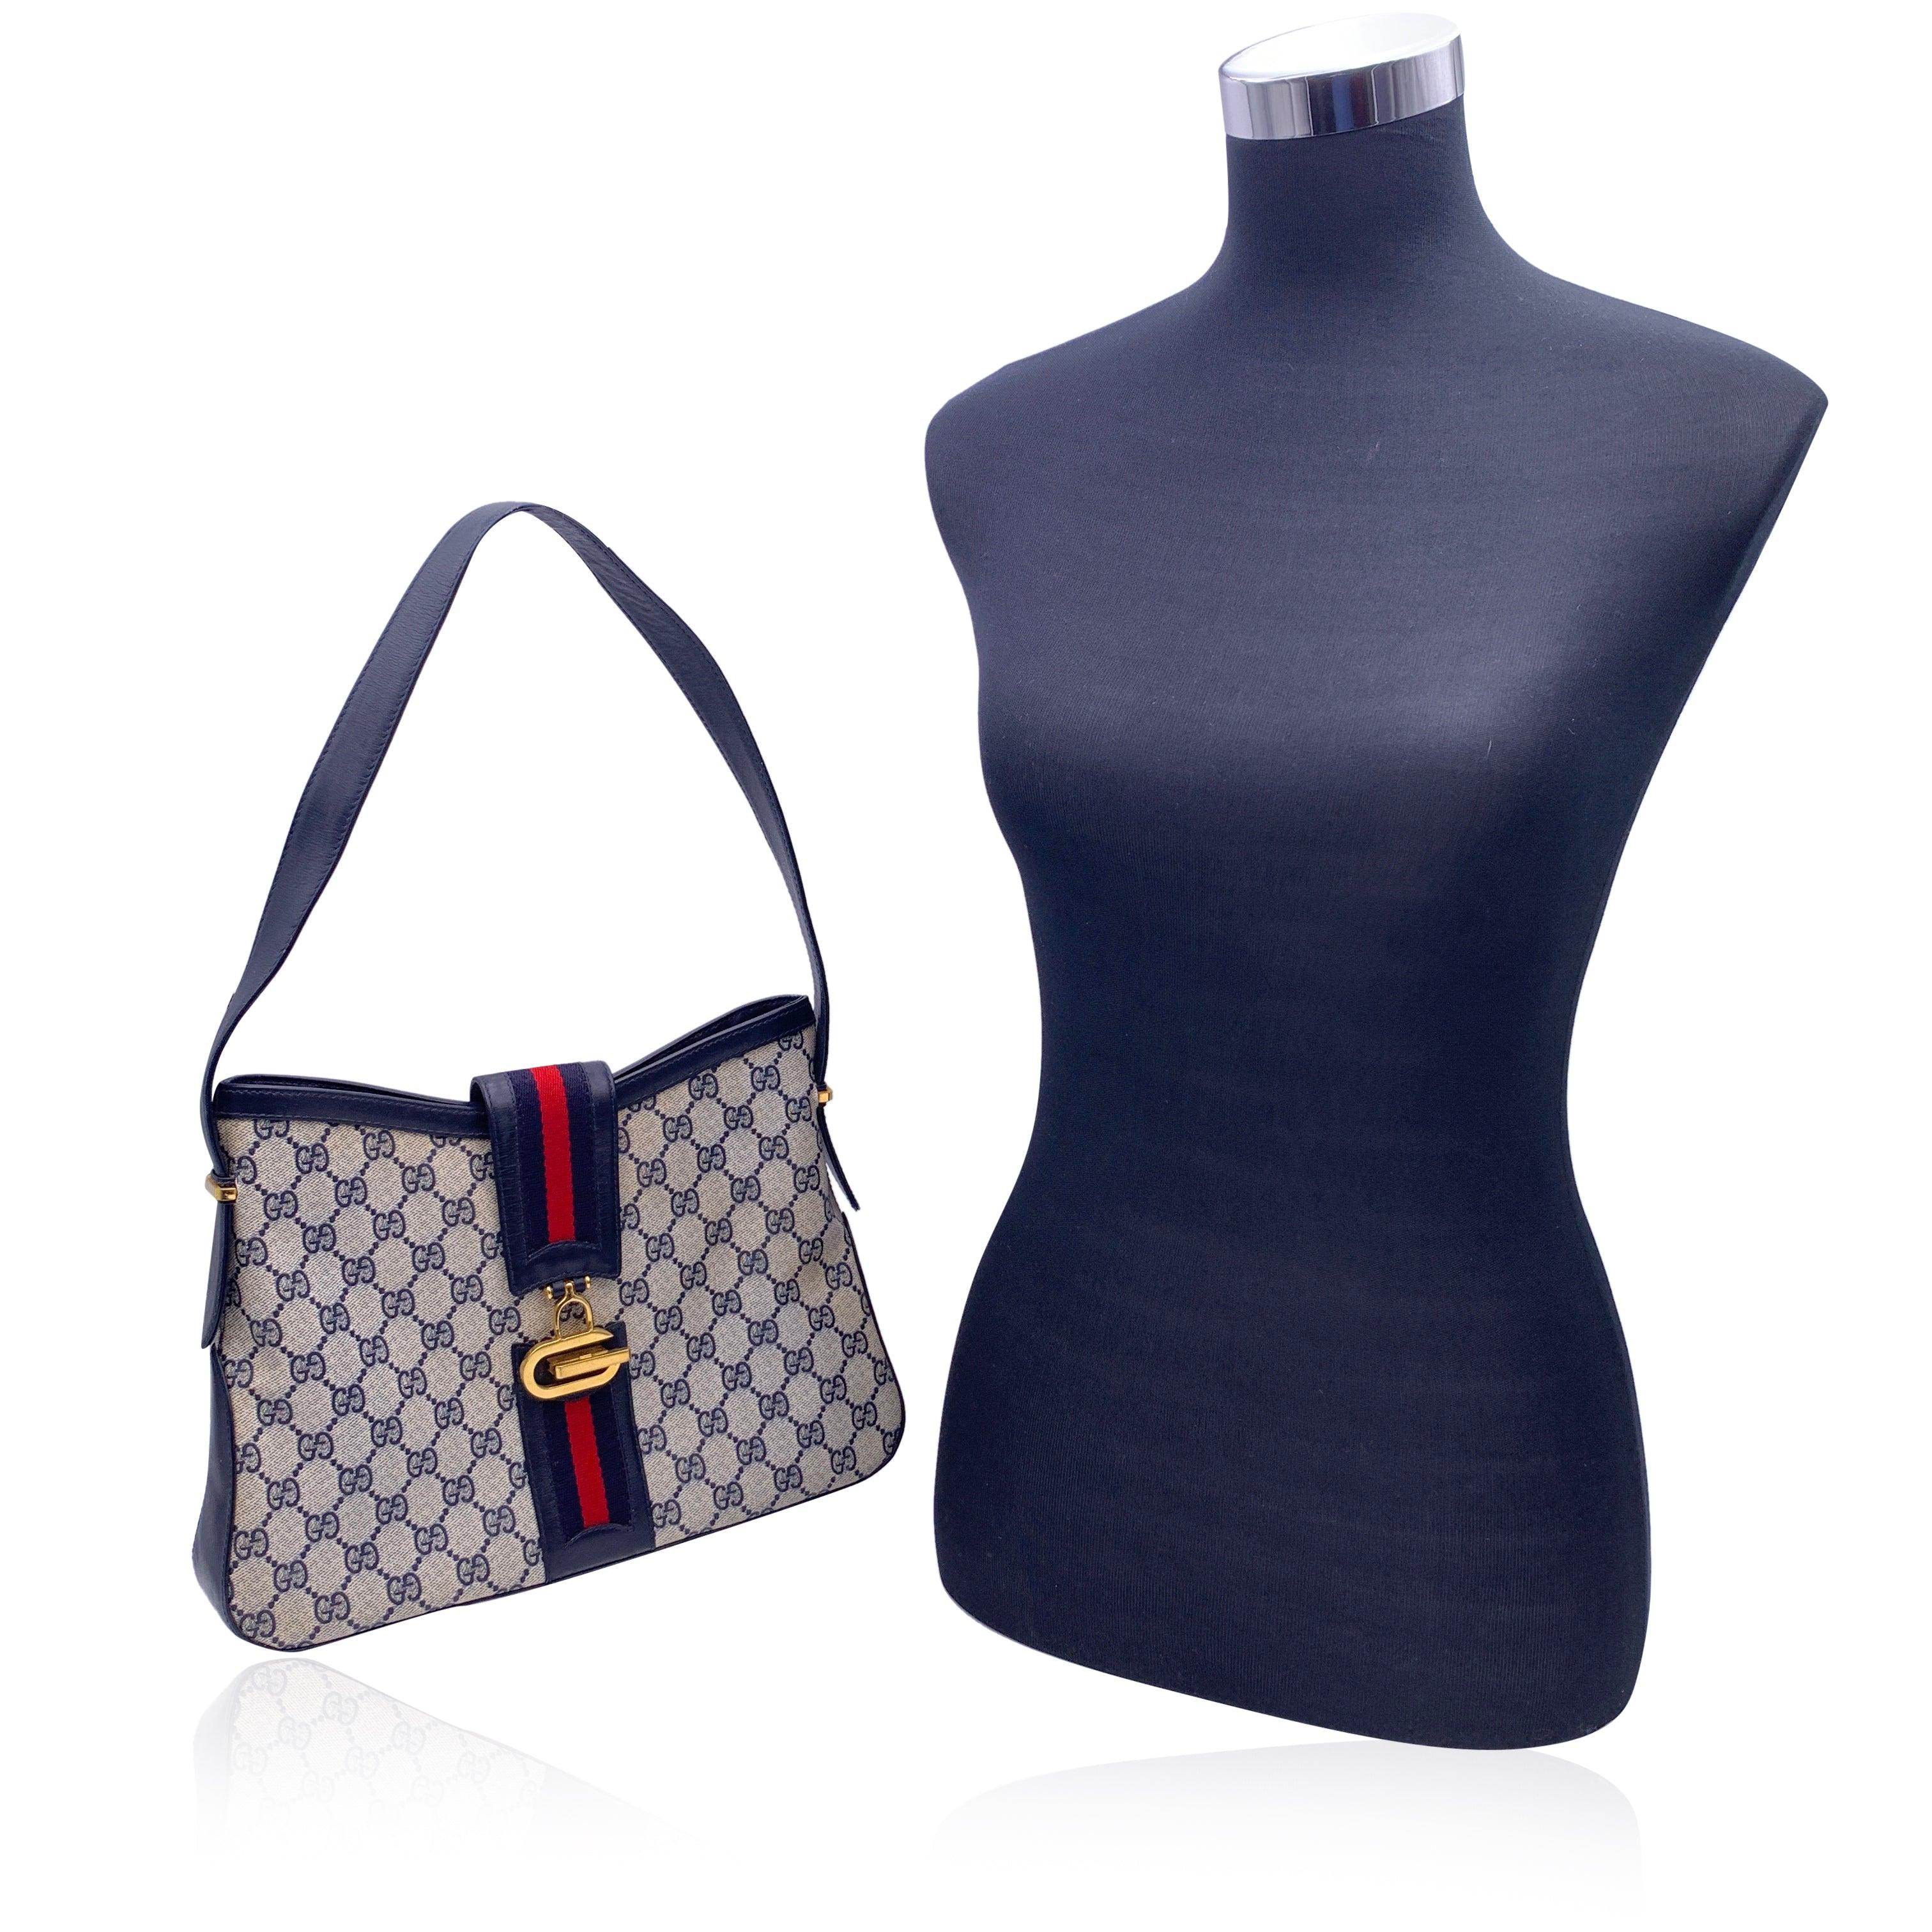 Gucci vintage shoulder bag. Monogram canvas with blue genuine leather trim and shoulder strap. Fold over strap with clasp closure. Blue/red/blue striped detailing. 1 side zip pocket and 1 side open pocket inside.'Made in Italy by Gucci' embossed